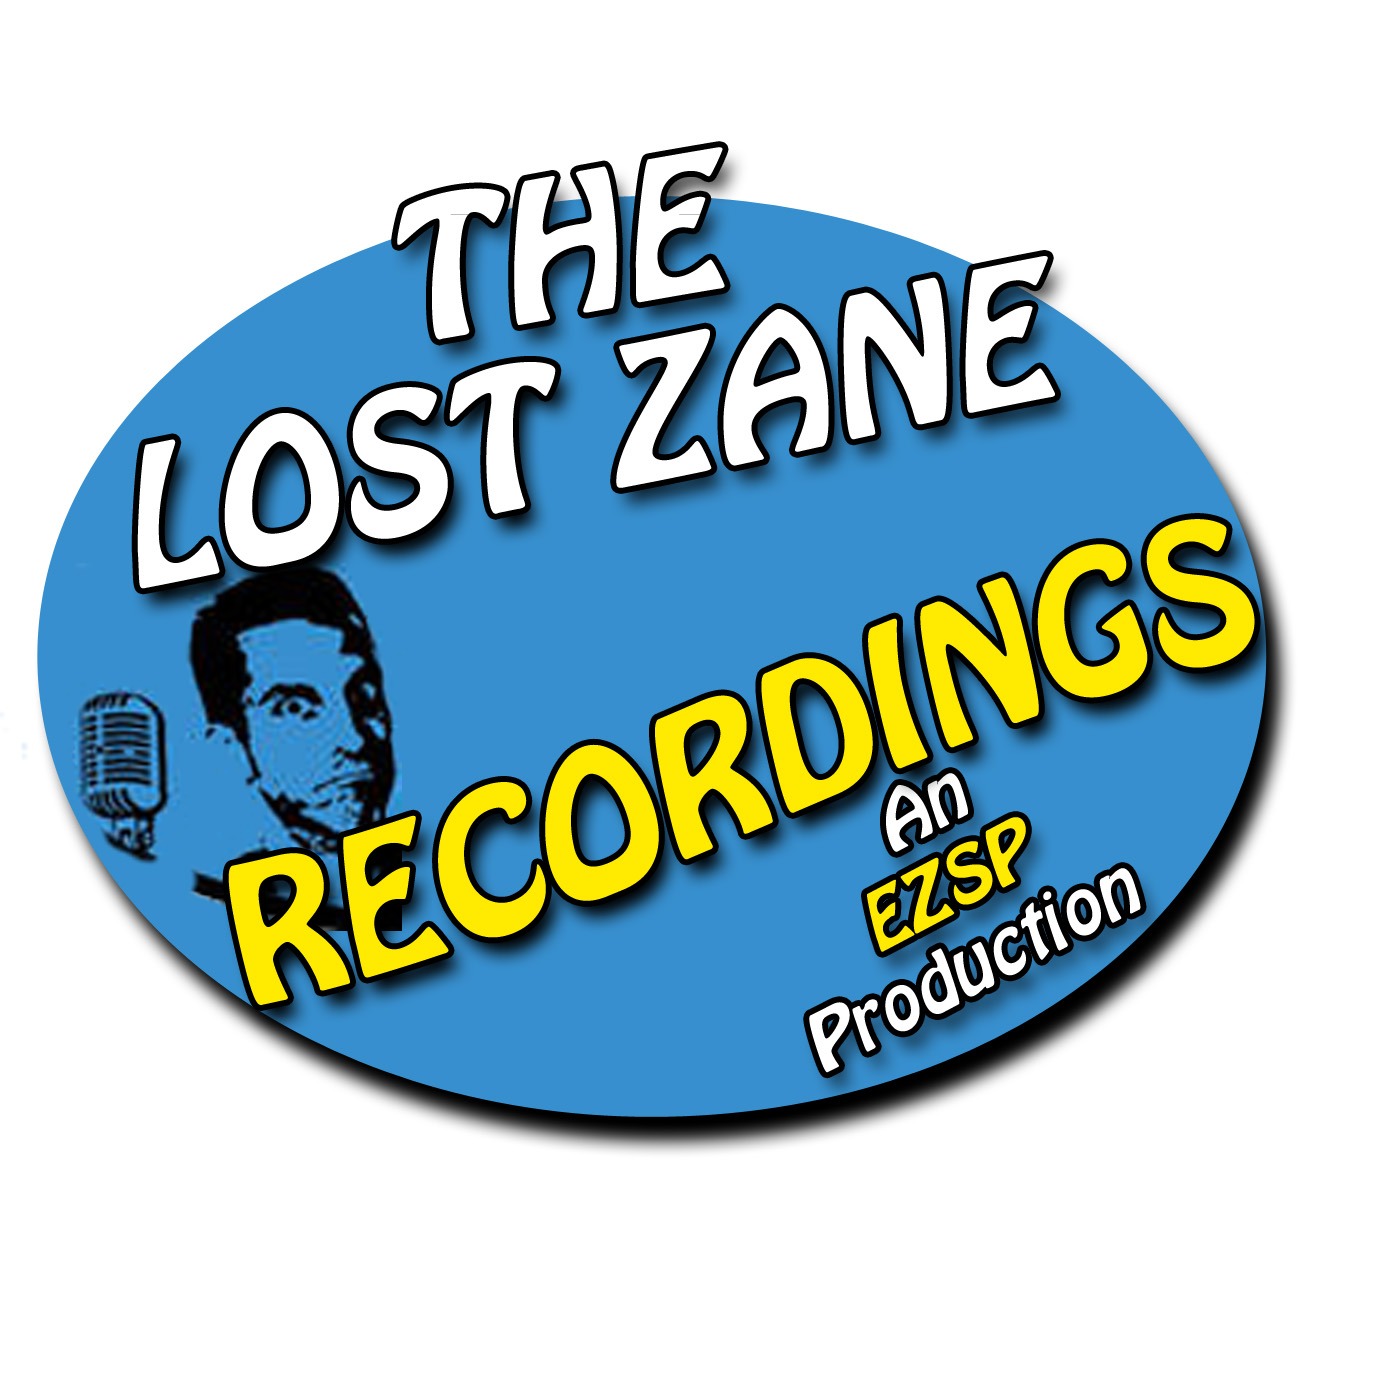 Lost Zane Recordings FREEview - Ramp a record like a DJ!